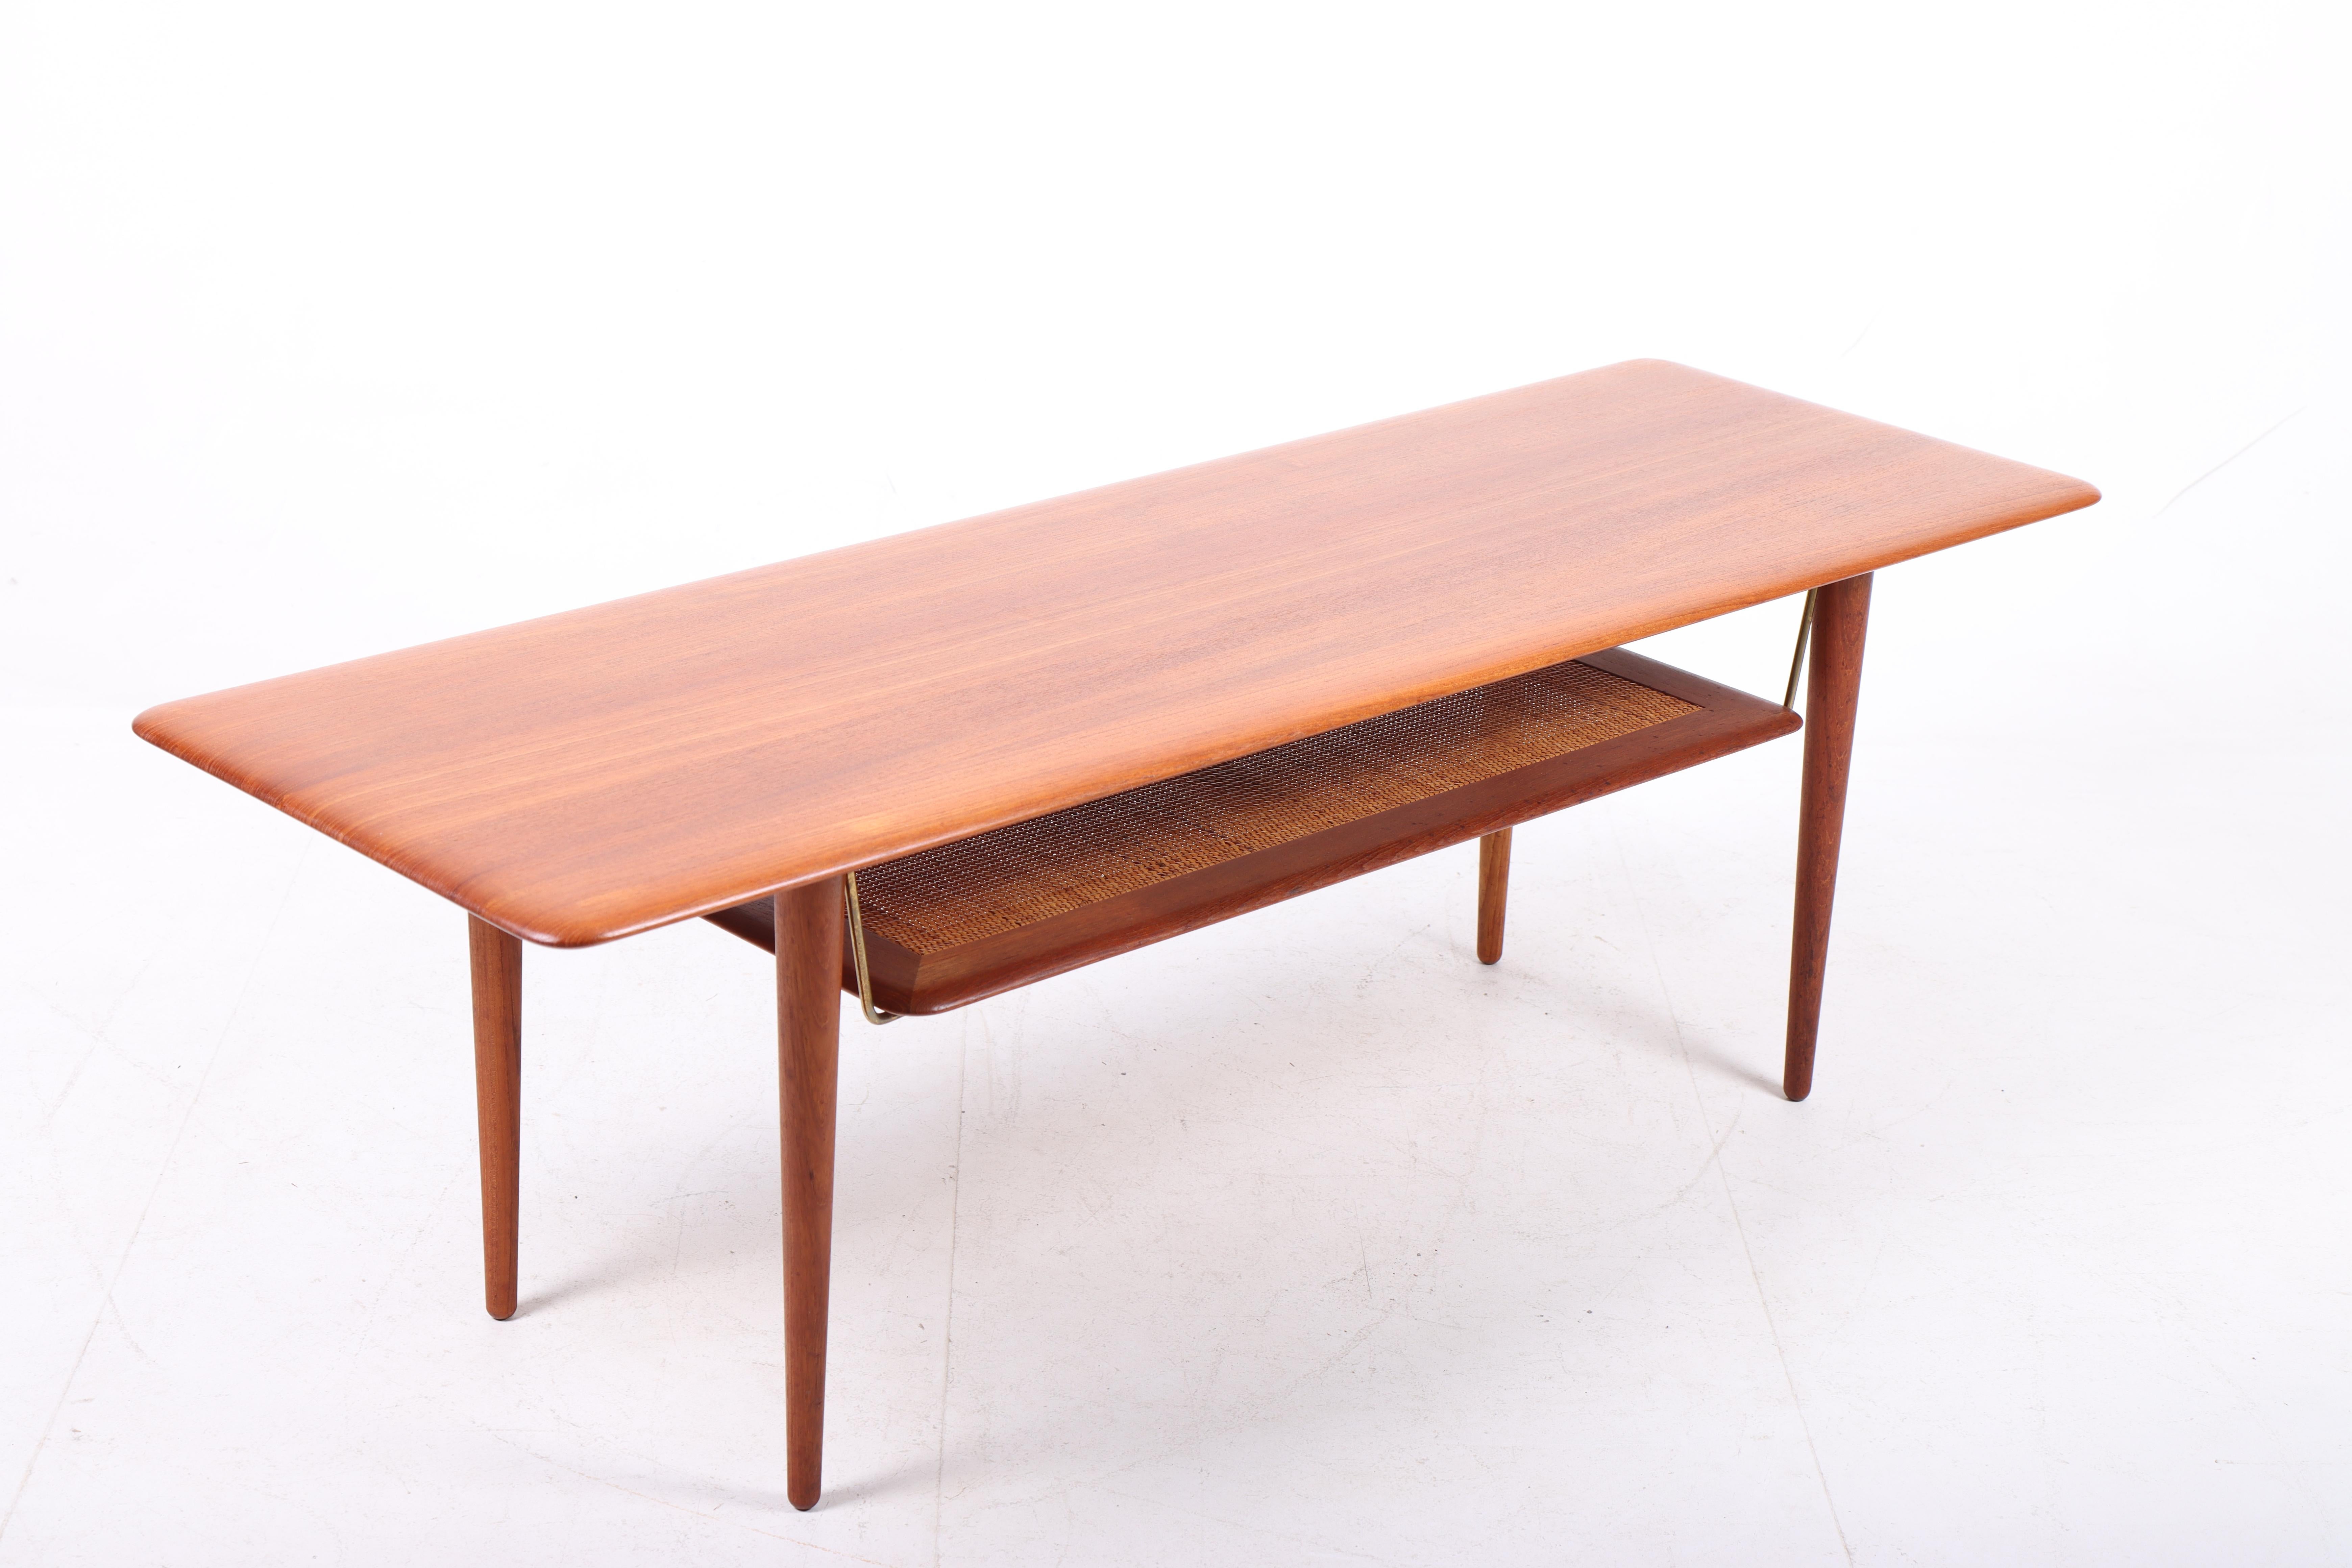 Danish Midcentury Low Table in Solid Teak and Cane by Hvidt & Mølgaard, Made in Denmark For Sale